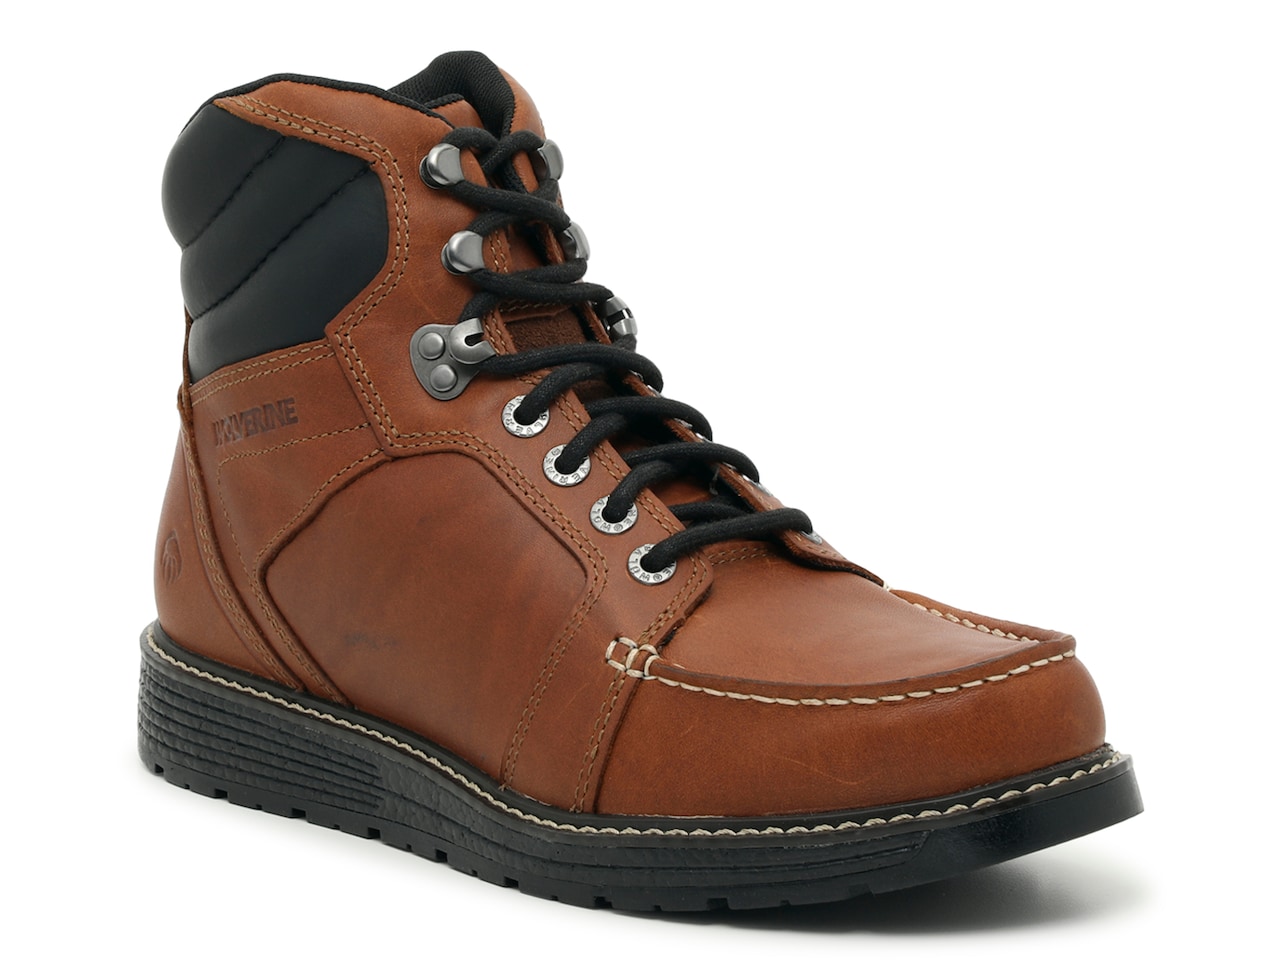 Wolverine Men's or Women's Boots & Shoes (various styles & colors)